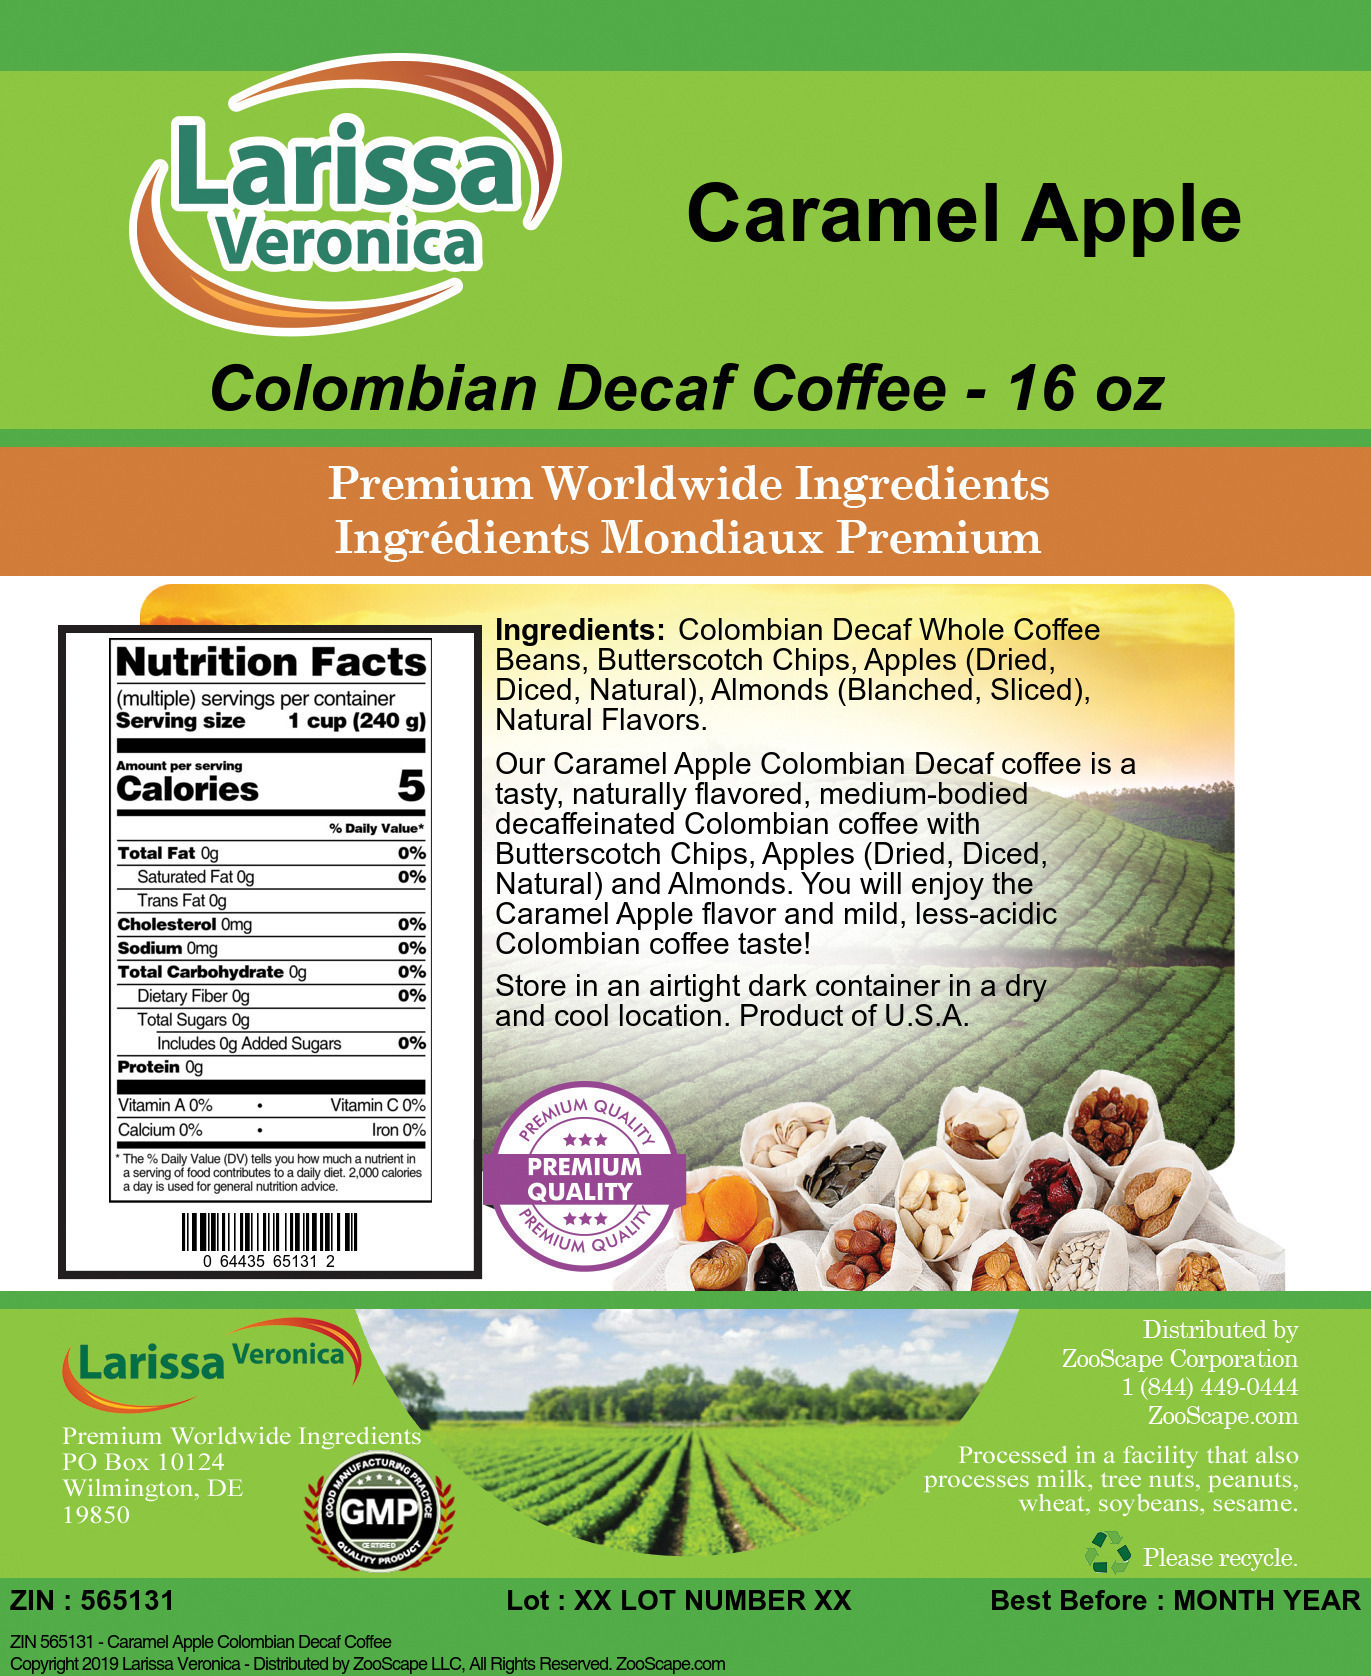 Caramel Apple Colombian Decaf Coffee - Label